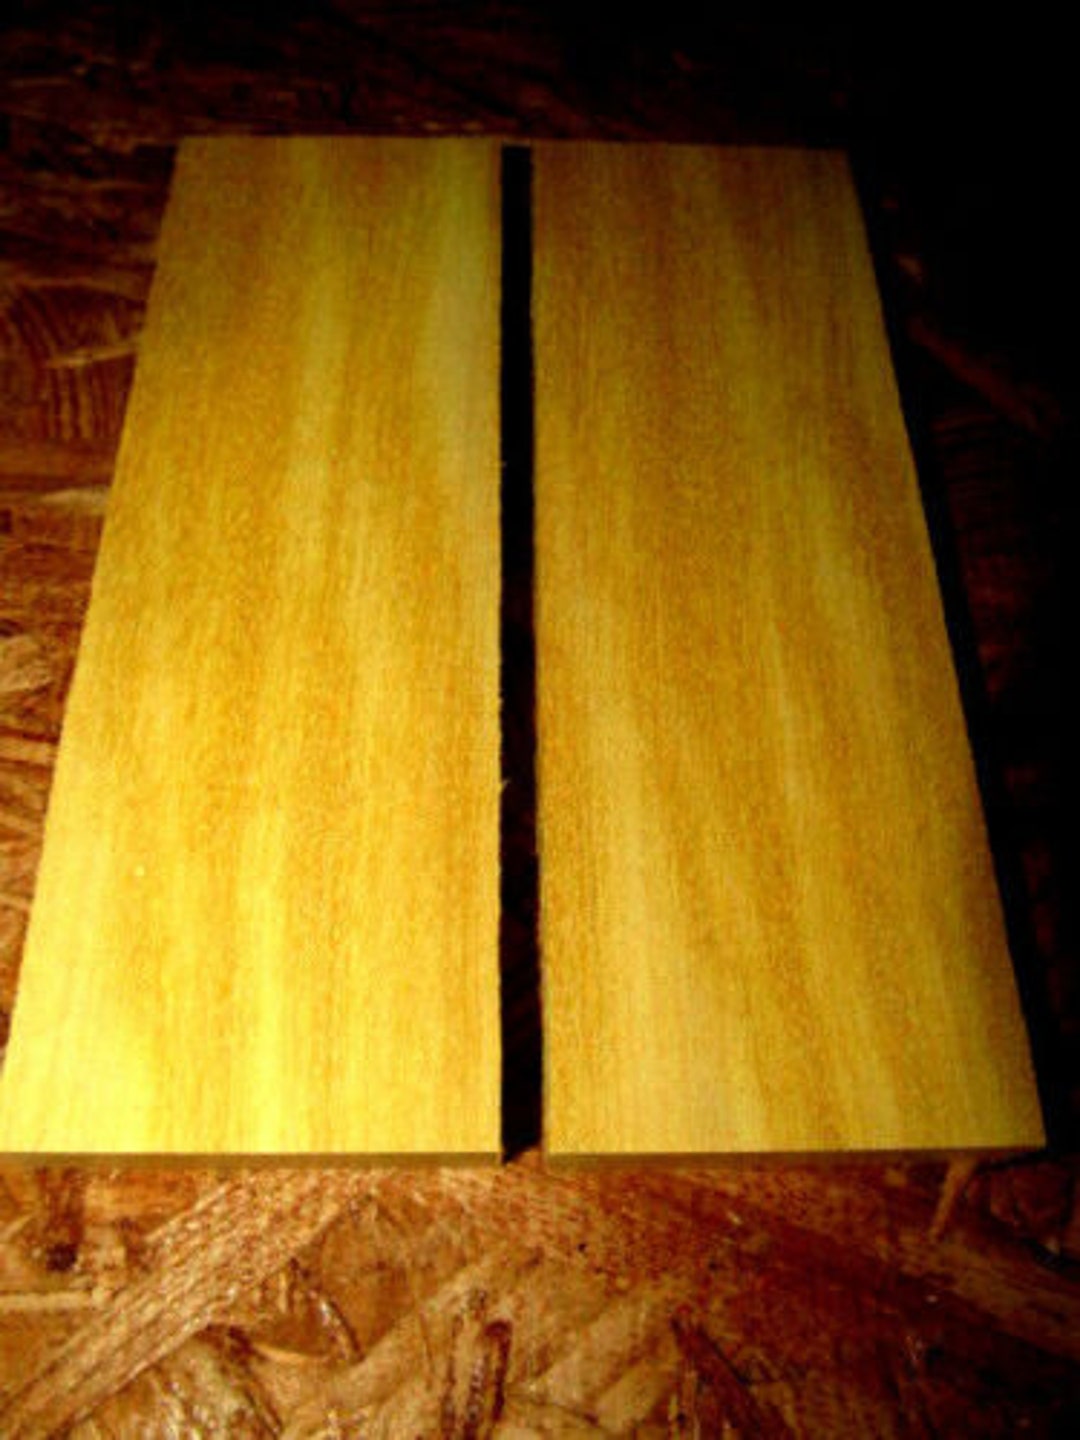 East Indian Rosewood Thin Stock Lumber Boards Wood Crafts